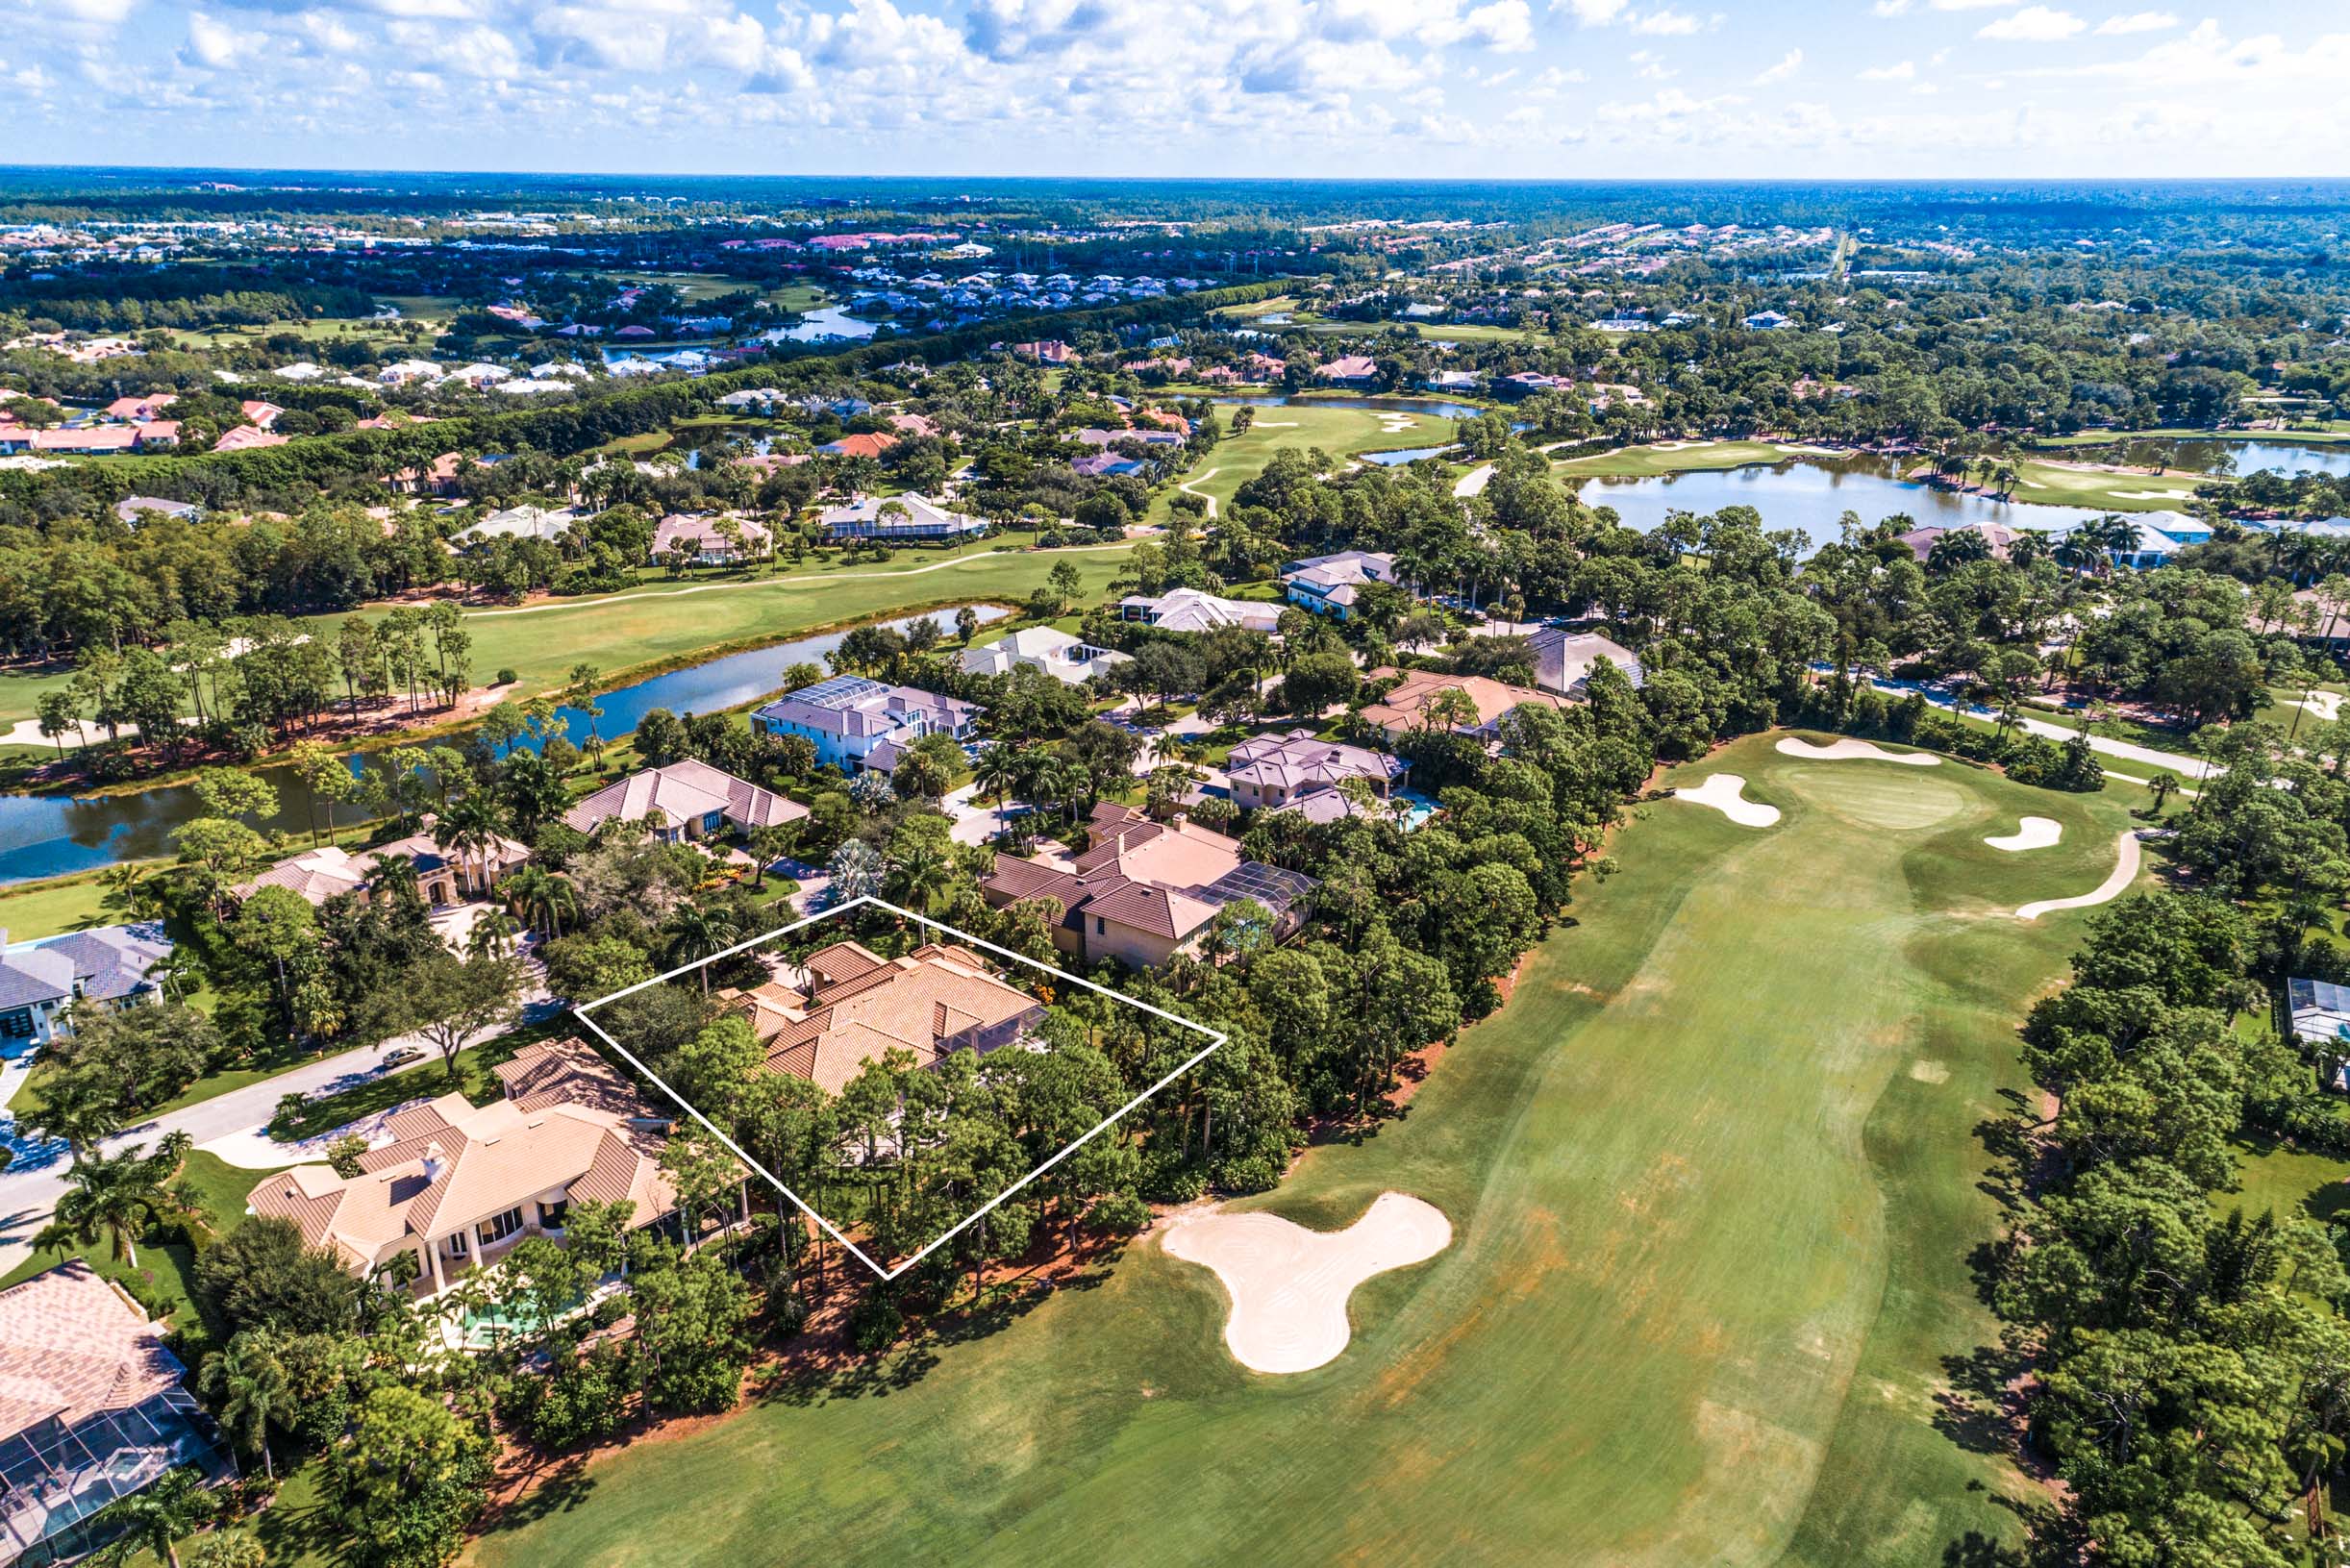 2716 Buckthorn Way - Arial View of Mansion Backyard to Golf Course